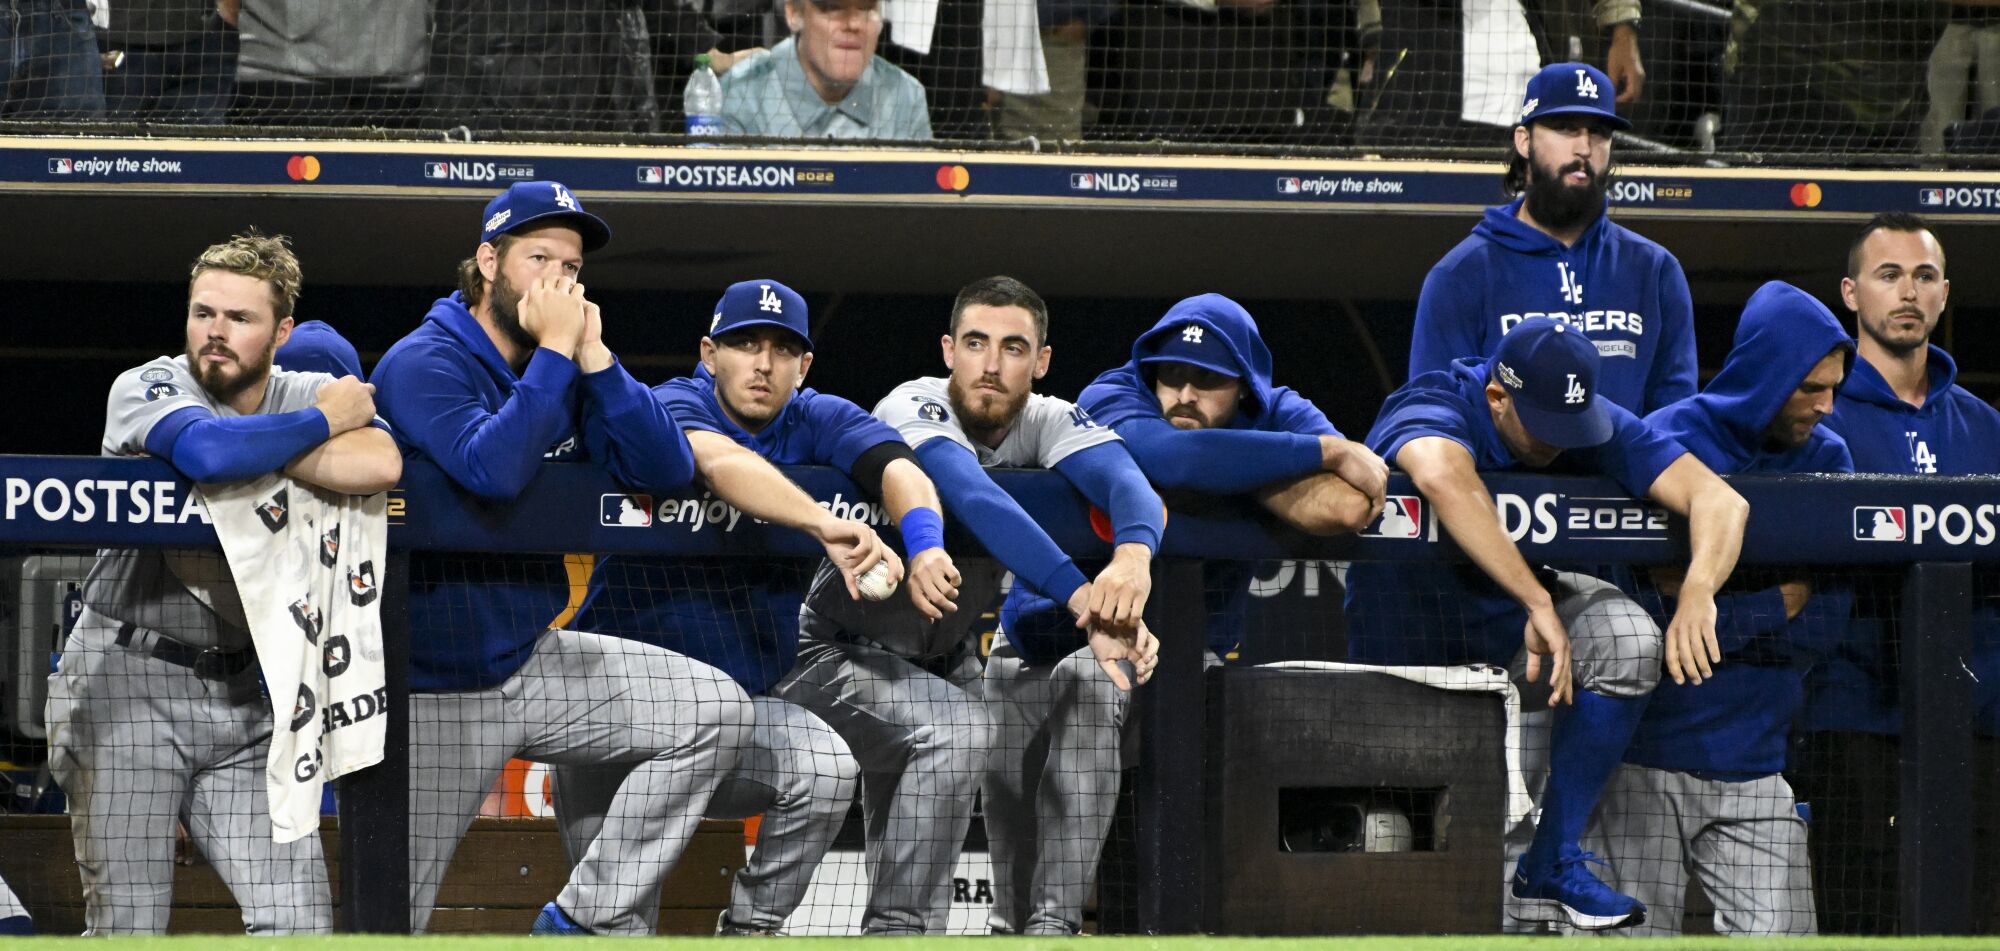 Dodgers players look on during the ninth inning of Game 4 of the NLDS against the Padres on Oct. 15, 2022, in San Diego.